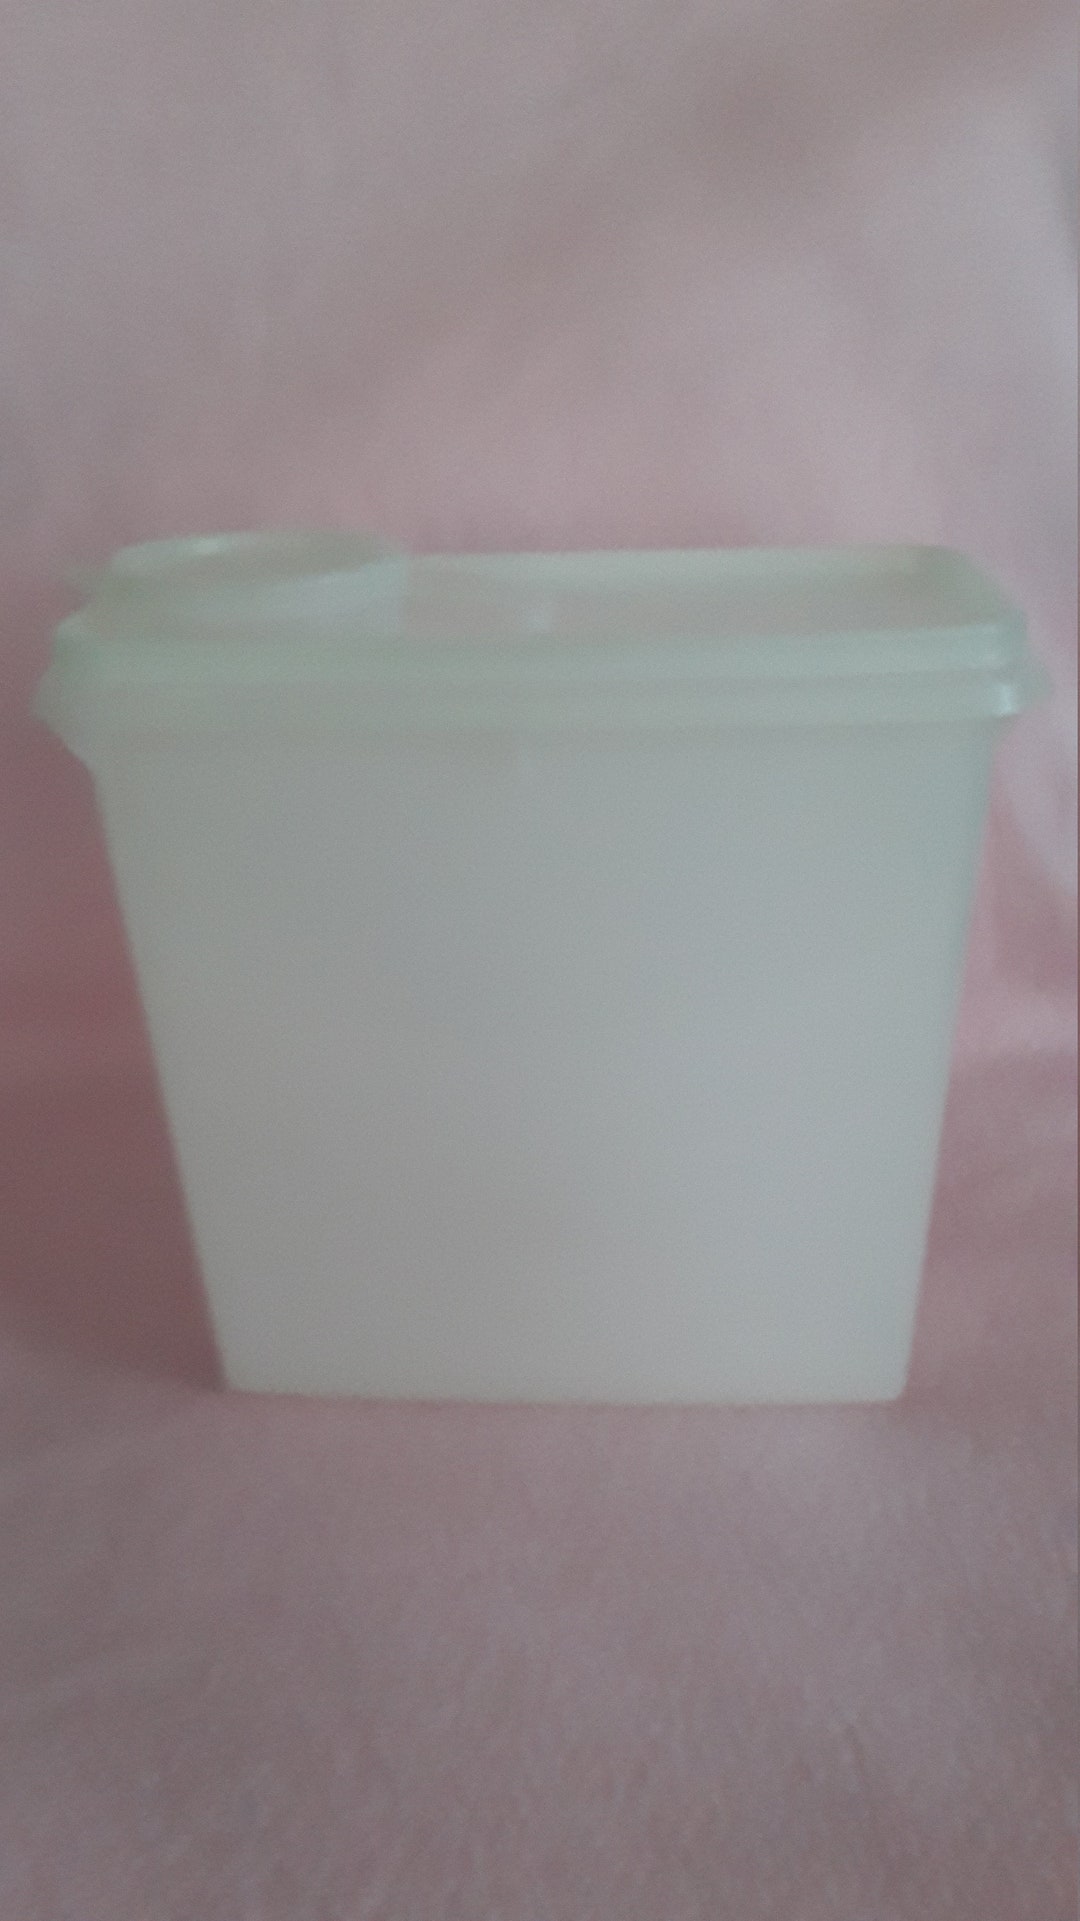 Vintage Tupperware Tall Storage Containers Preowned Food 